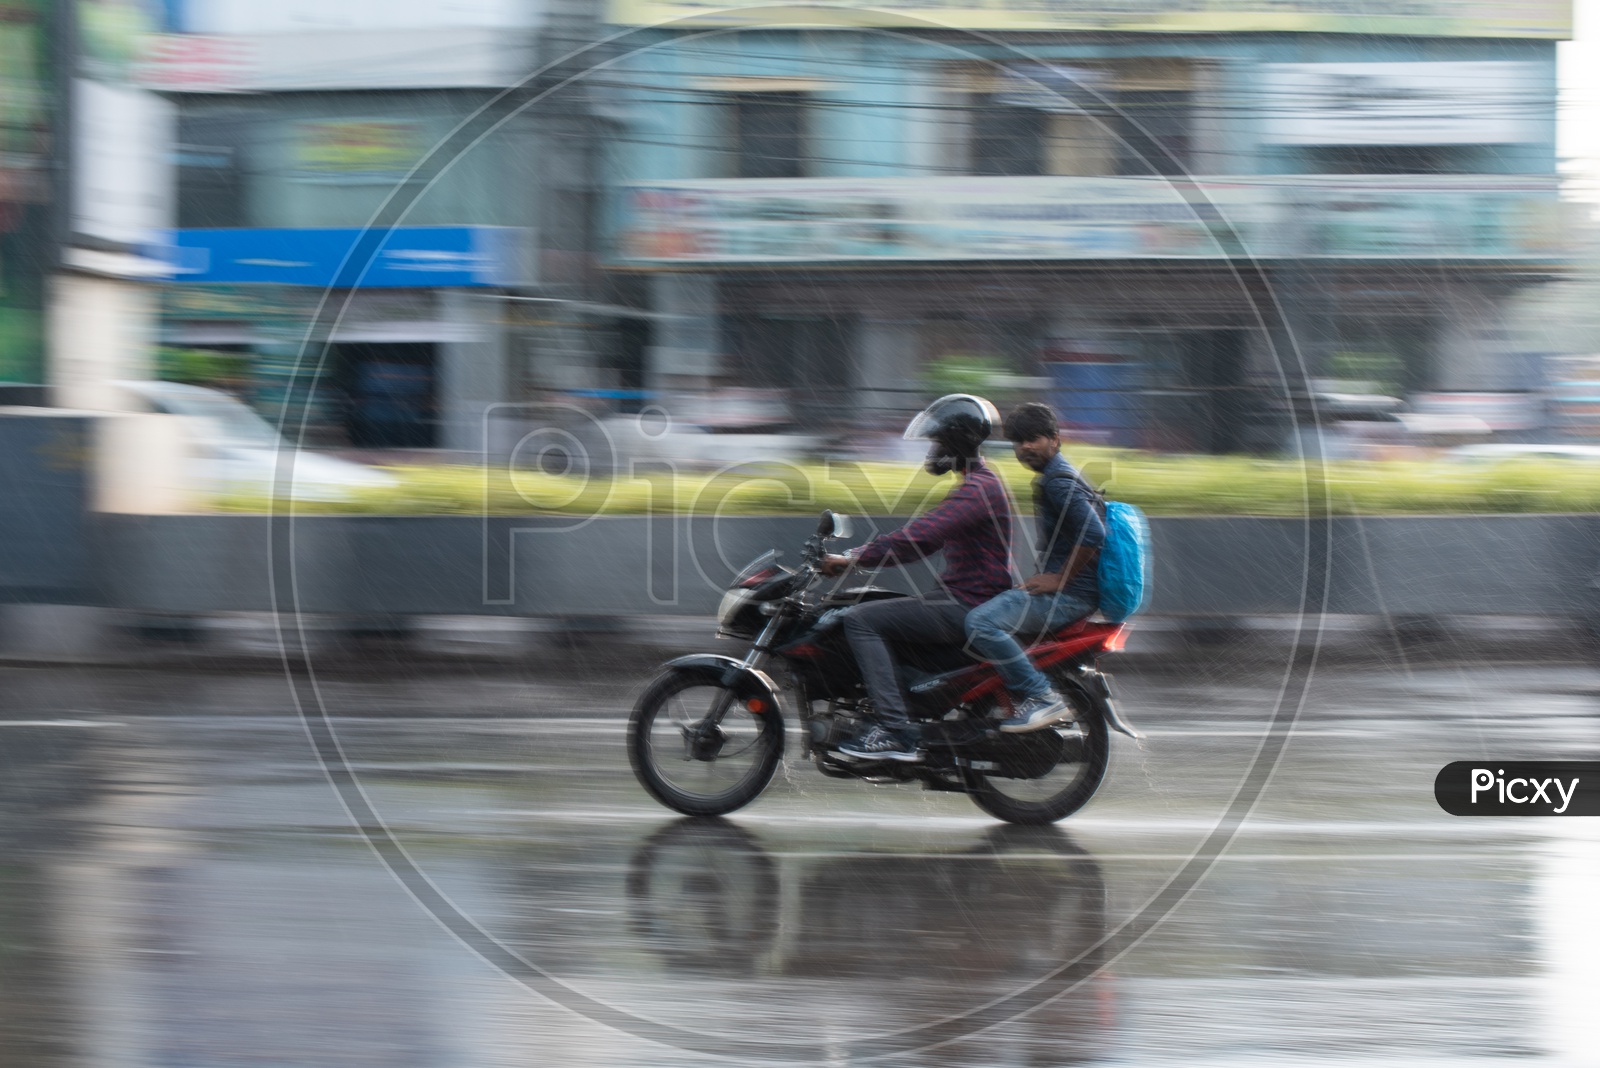 Motorcyclists Or Bike Commuters On Flooded City Roads On A Rainy Day